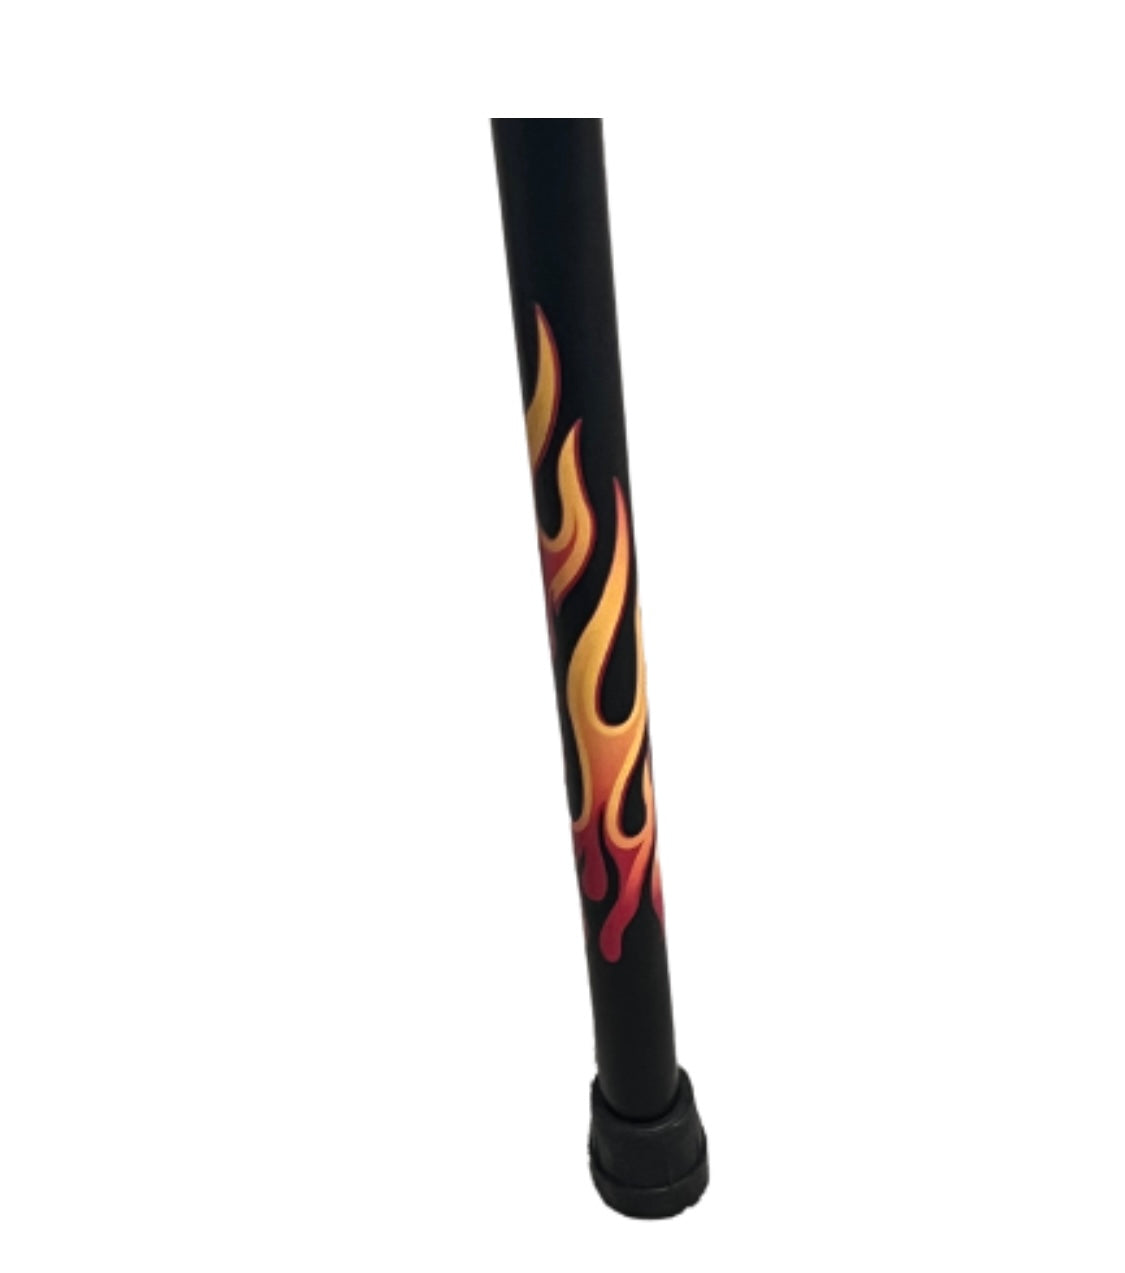 HOUSE:  Dr. Gregory House's Dark Wood Flame Cane (4 of 5)